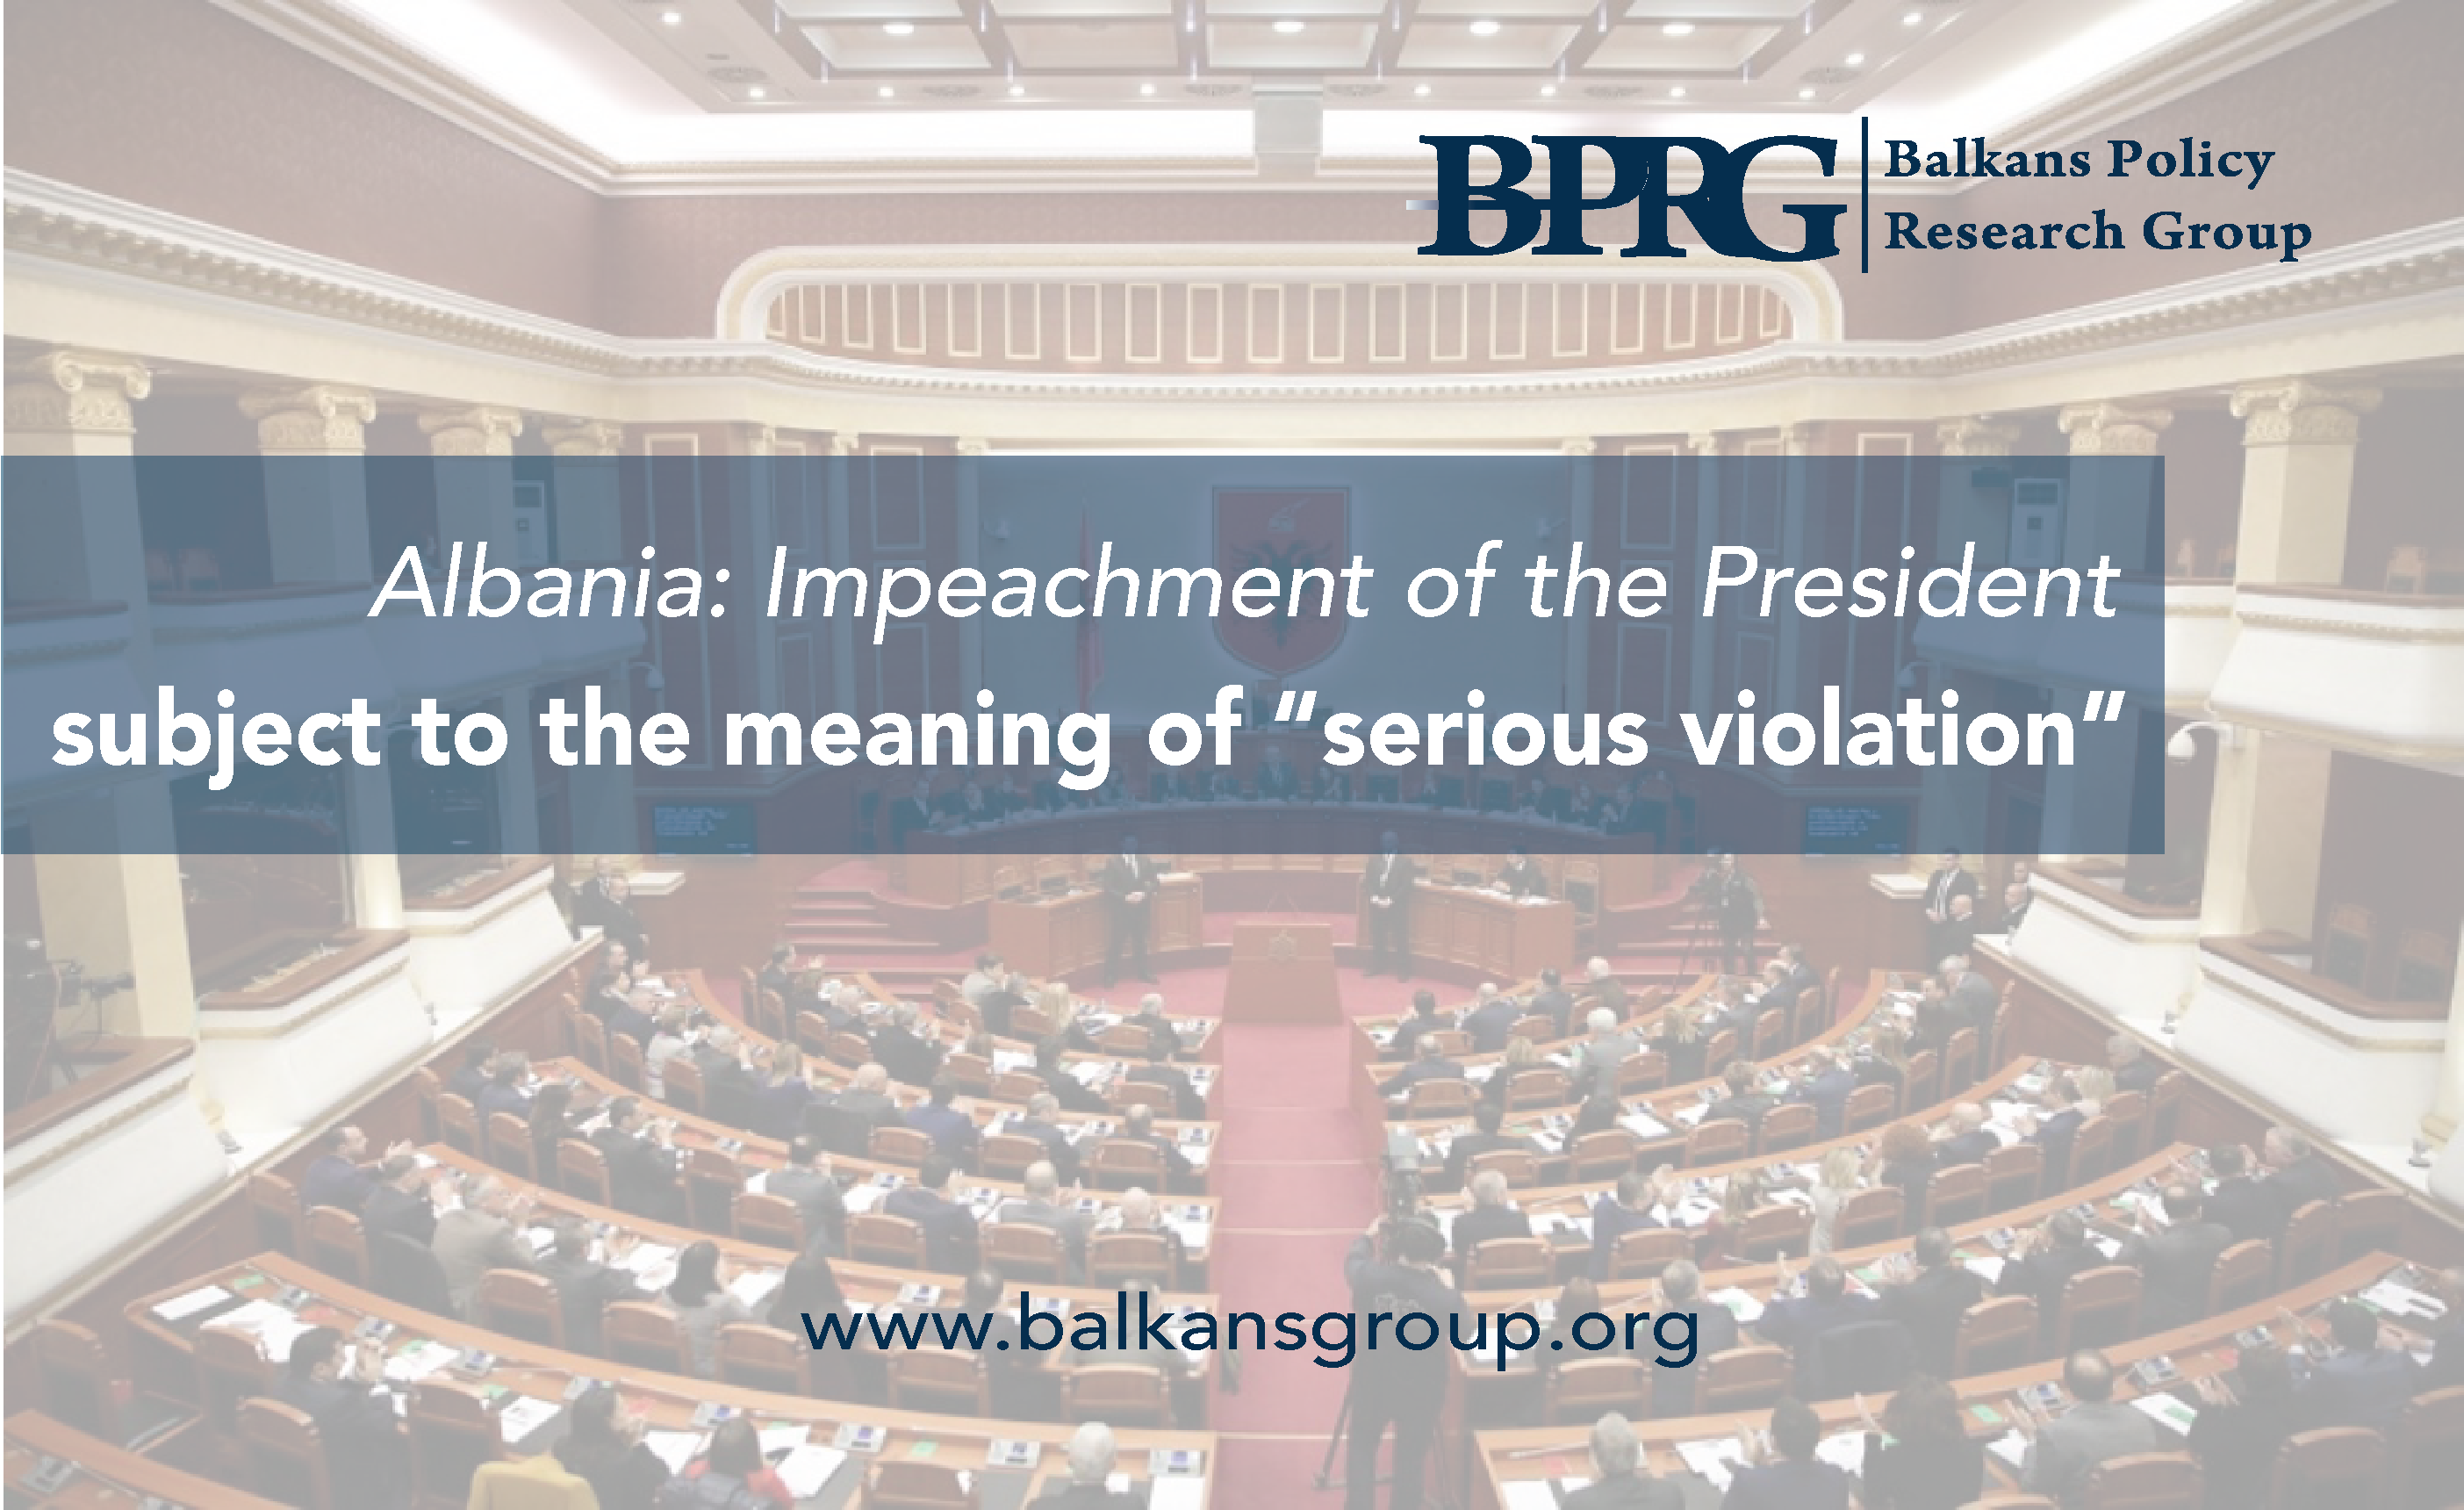 Albania: Impeachment of the President, subject to the meaning of “serious violation